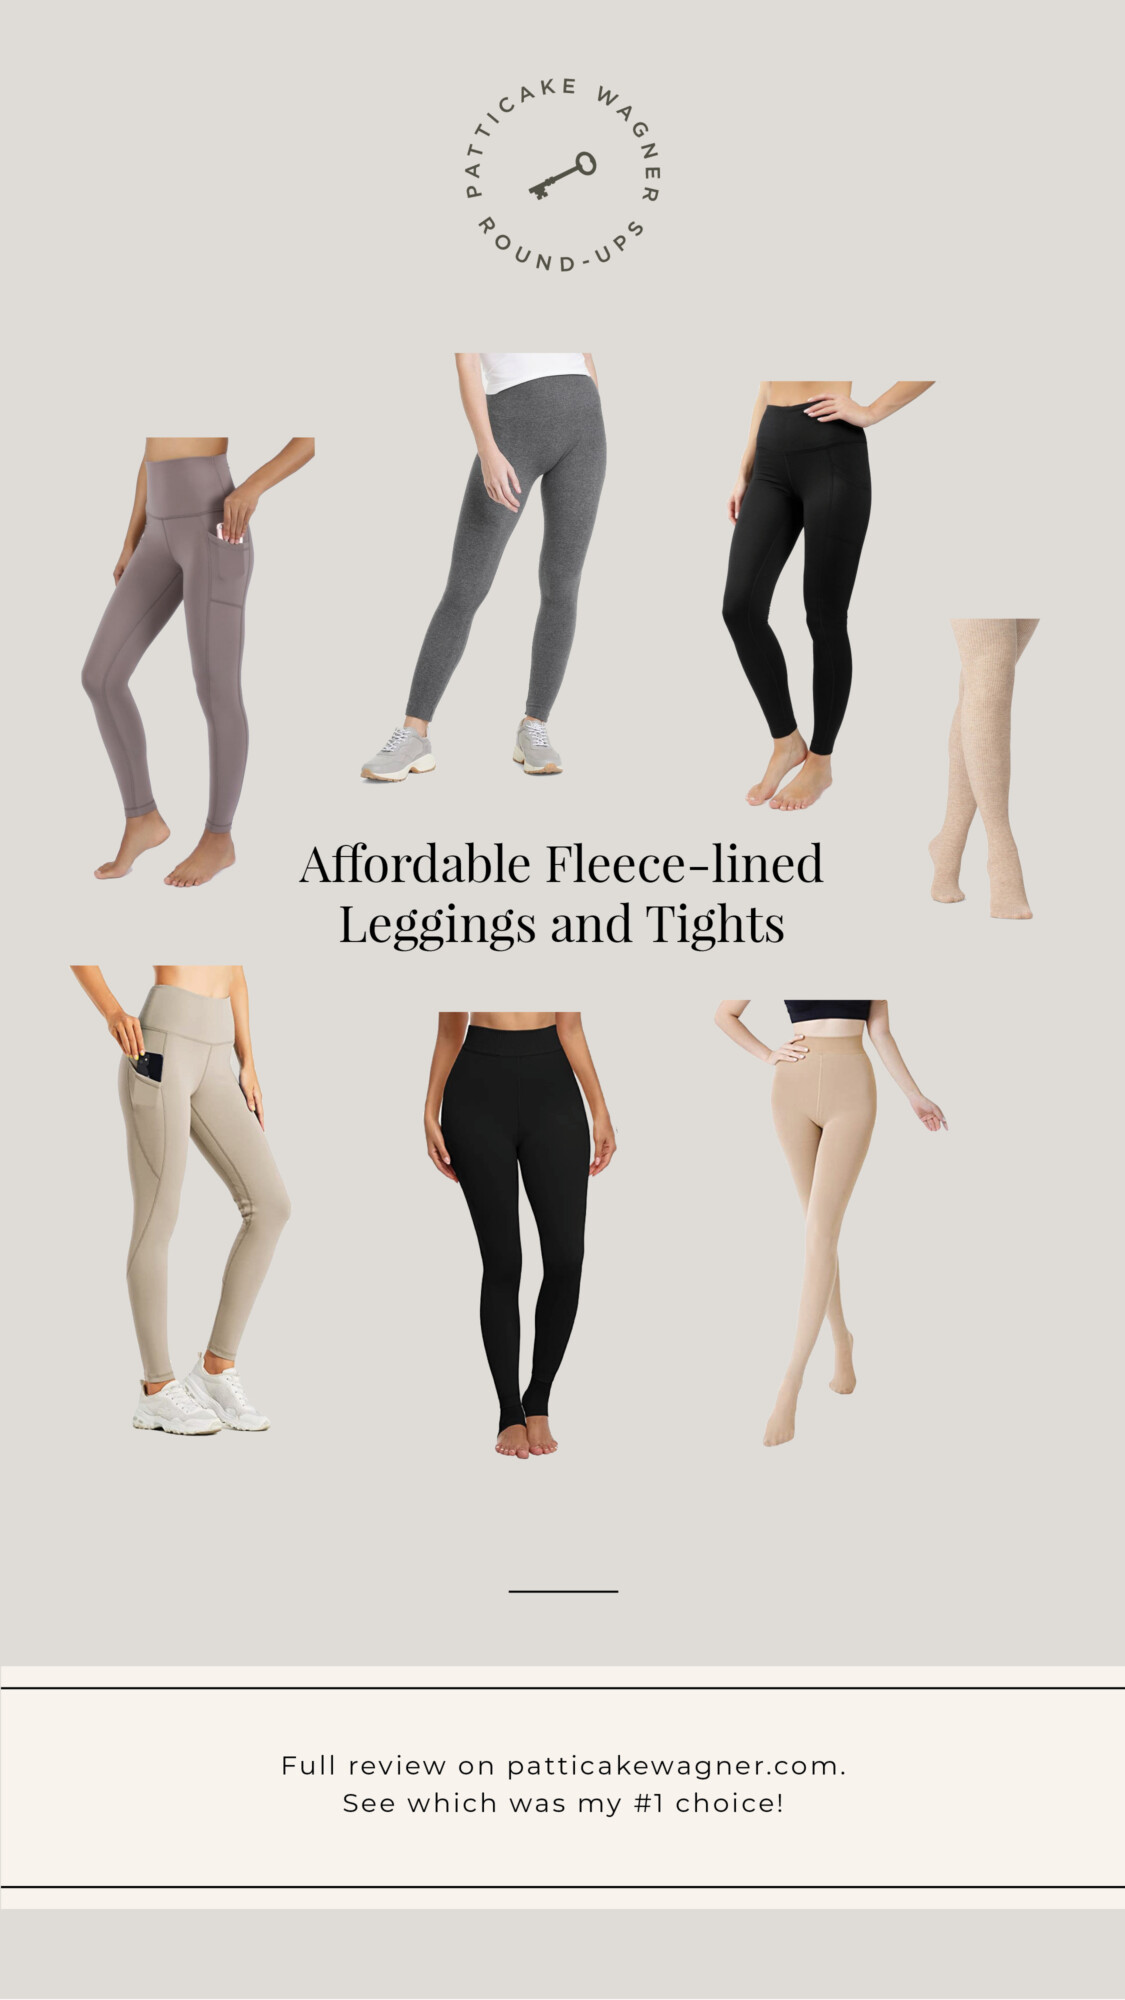 Fleece-Lined Leggings & Tights for Cold Weather Wardrobe